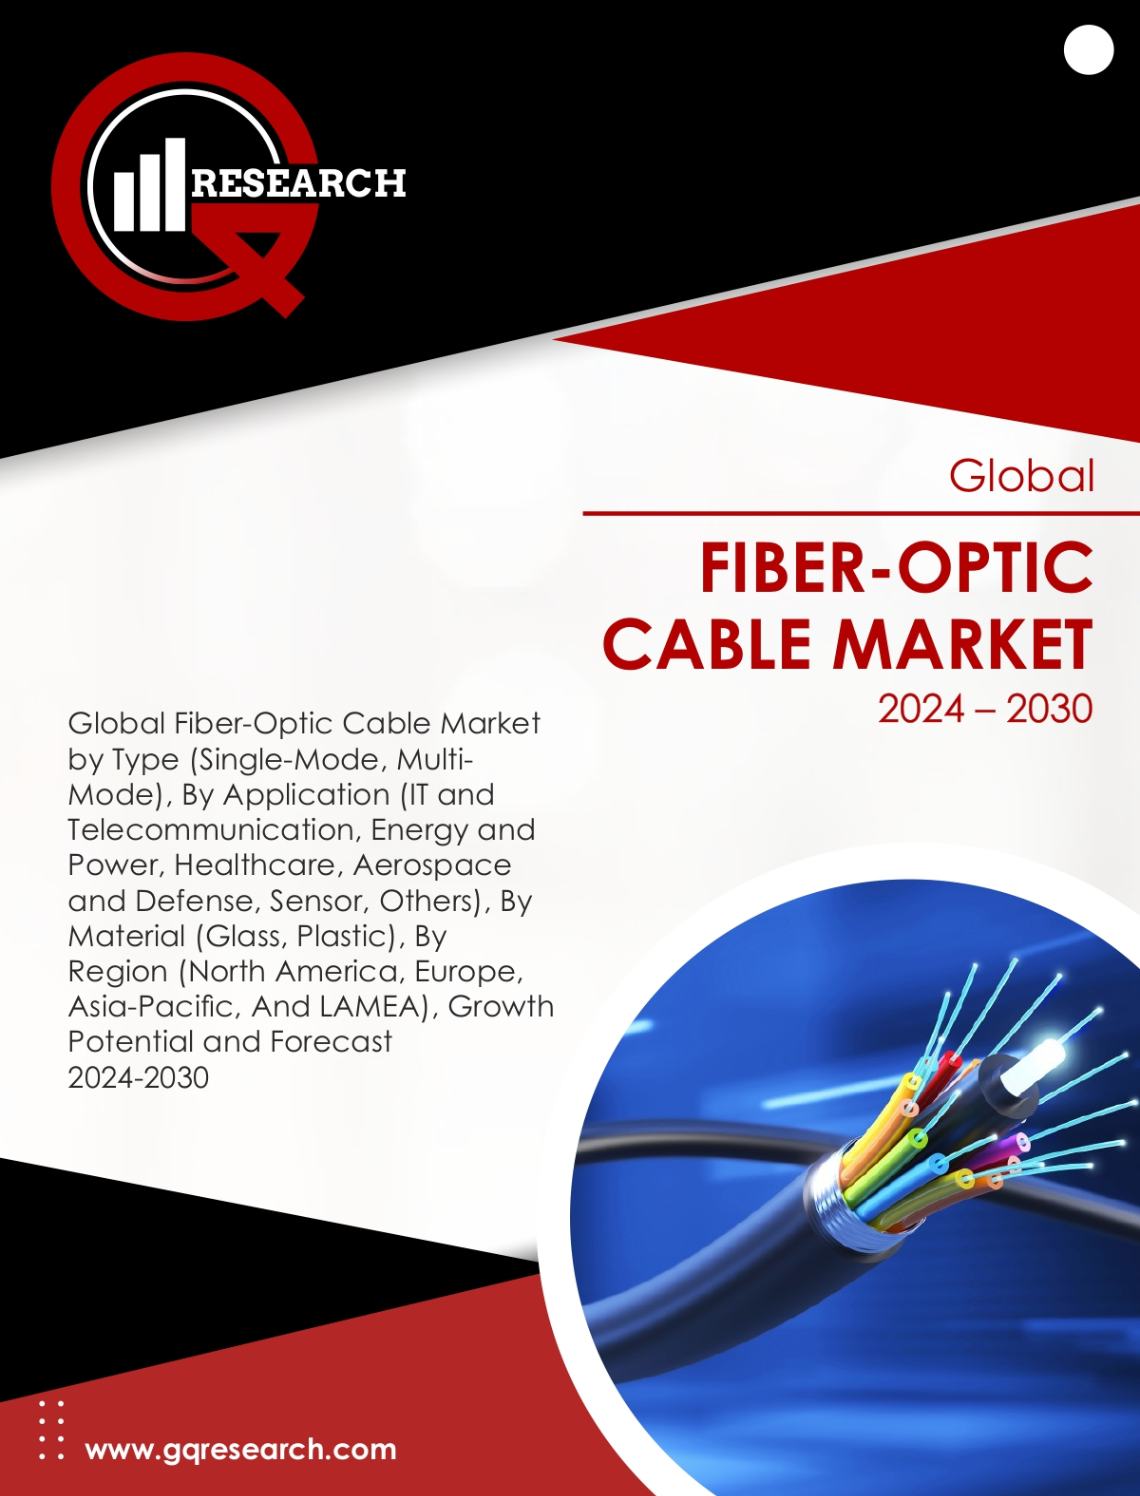 Fiber-Optic Cable Market Size, Share, Growth Analysis & Forecast to 2030 | GQ Research